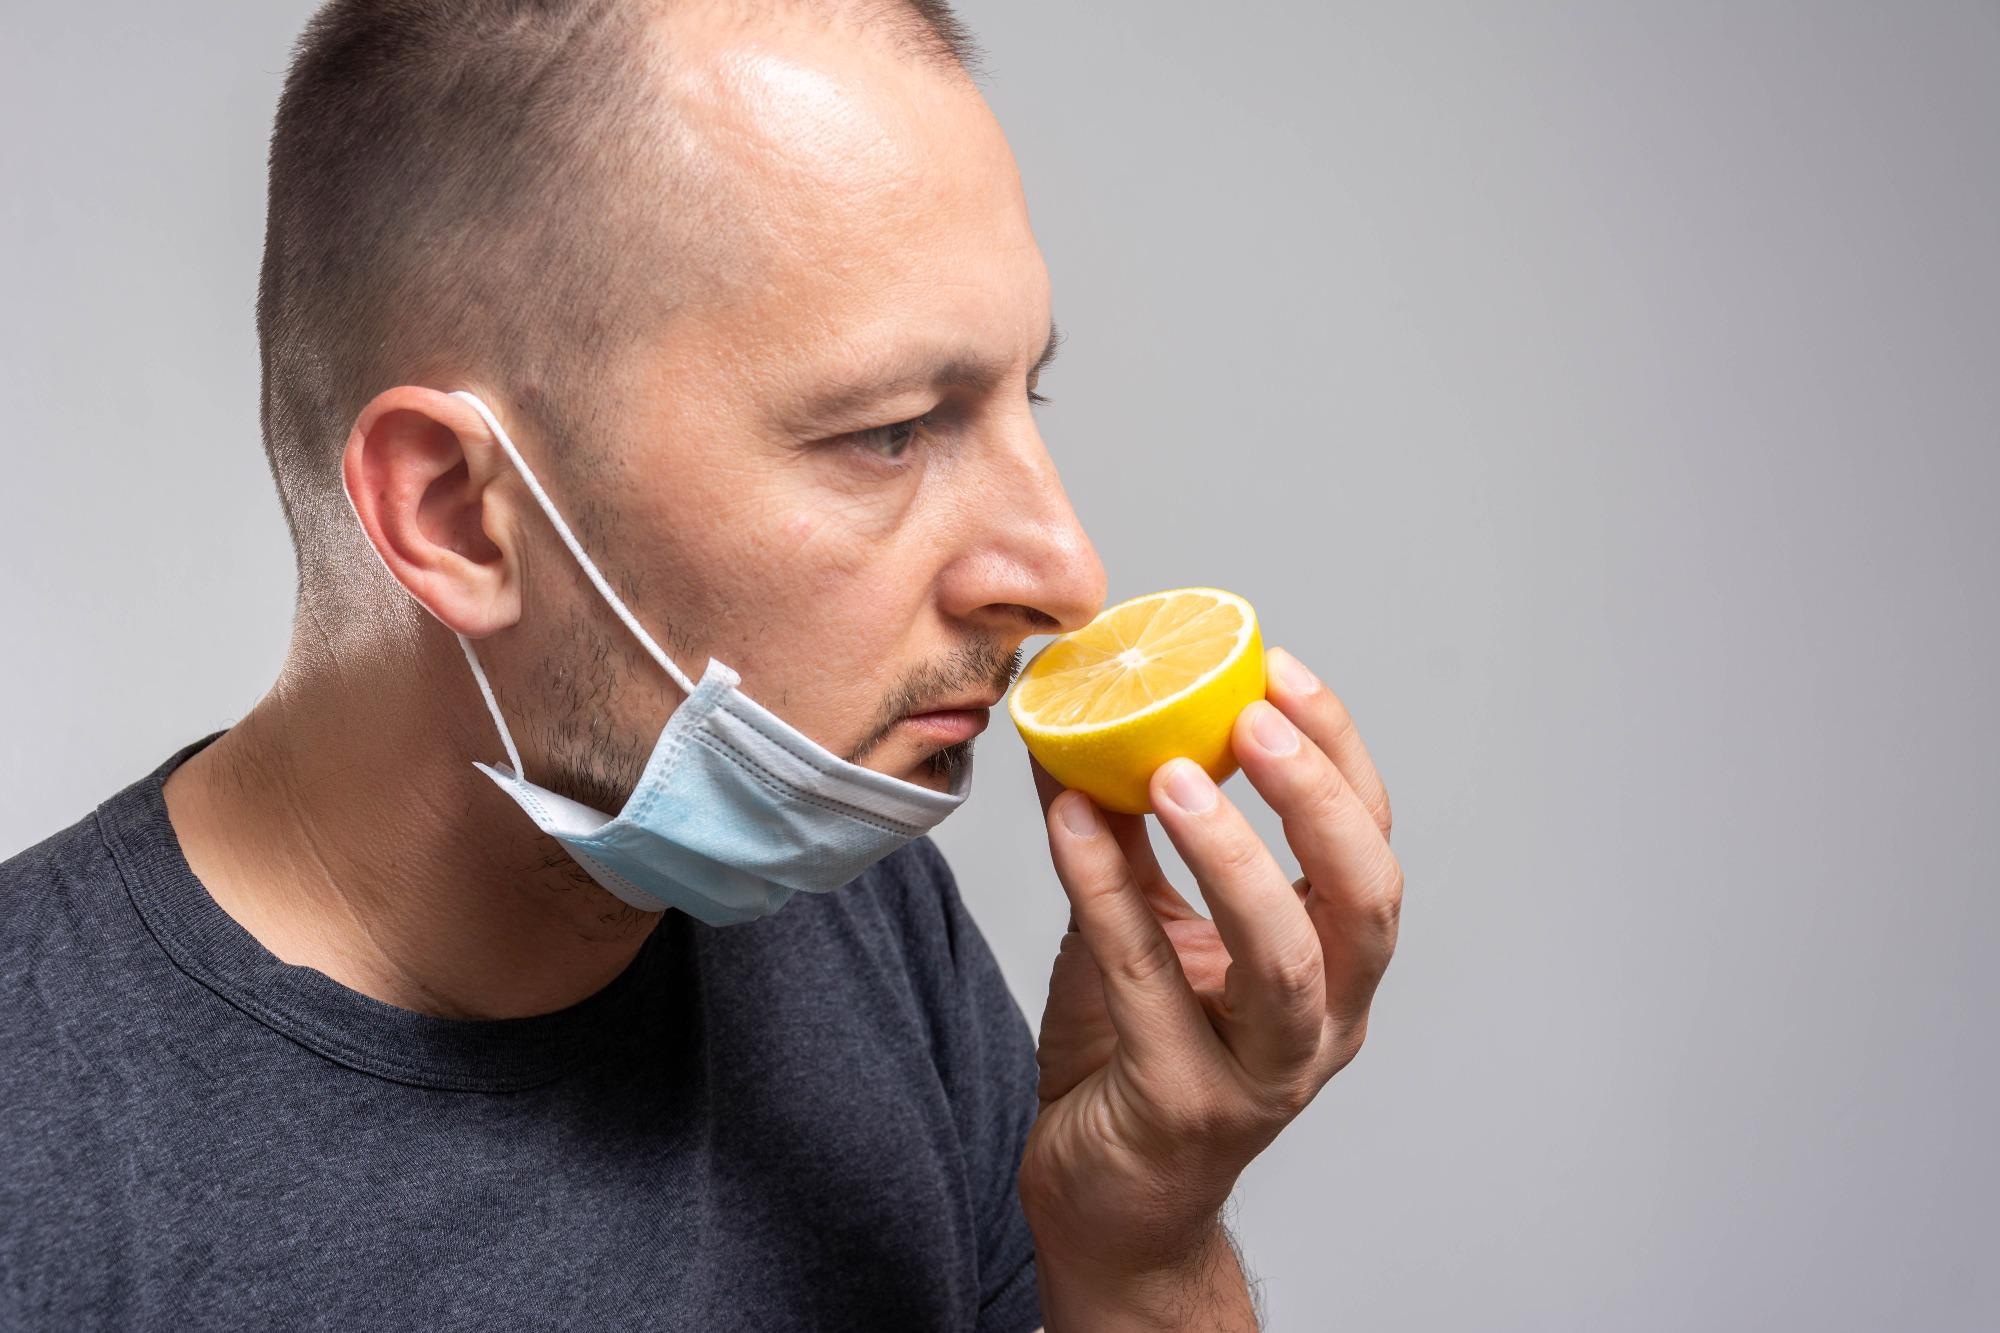 Study: Elevated expression of RGS2 may underlie reduced olfaction in COVID-19 patients. Image Credit: Nenad Cavoski / Shutterstock